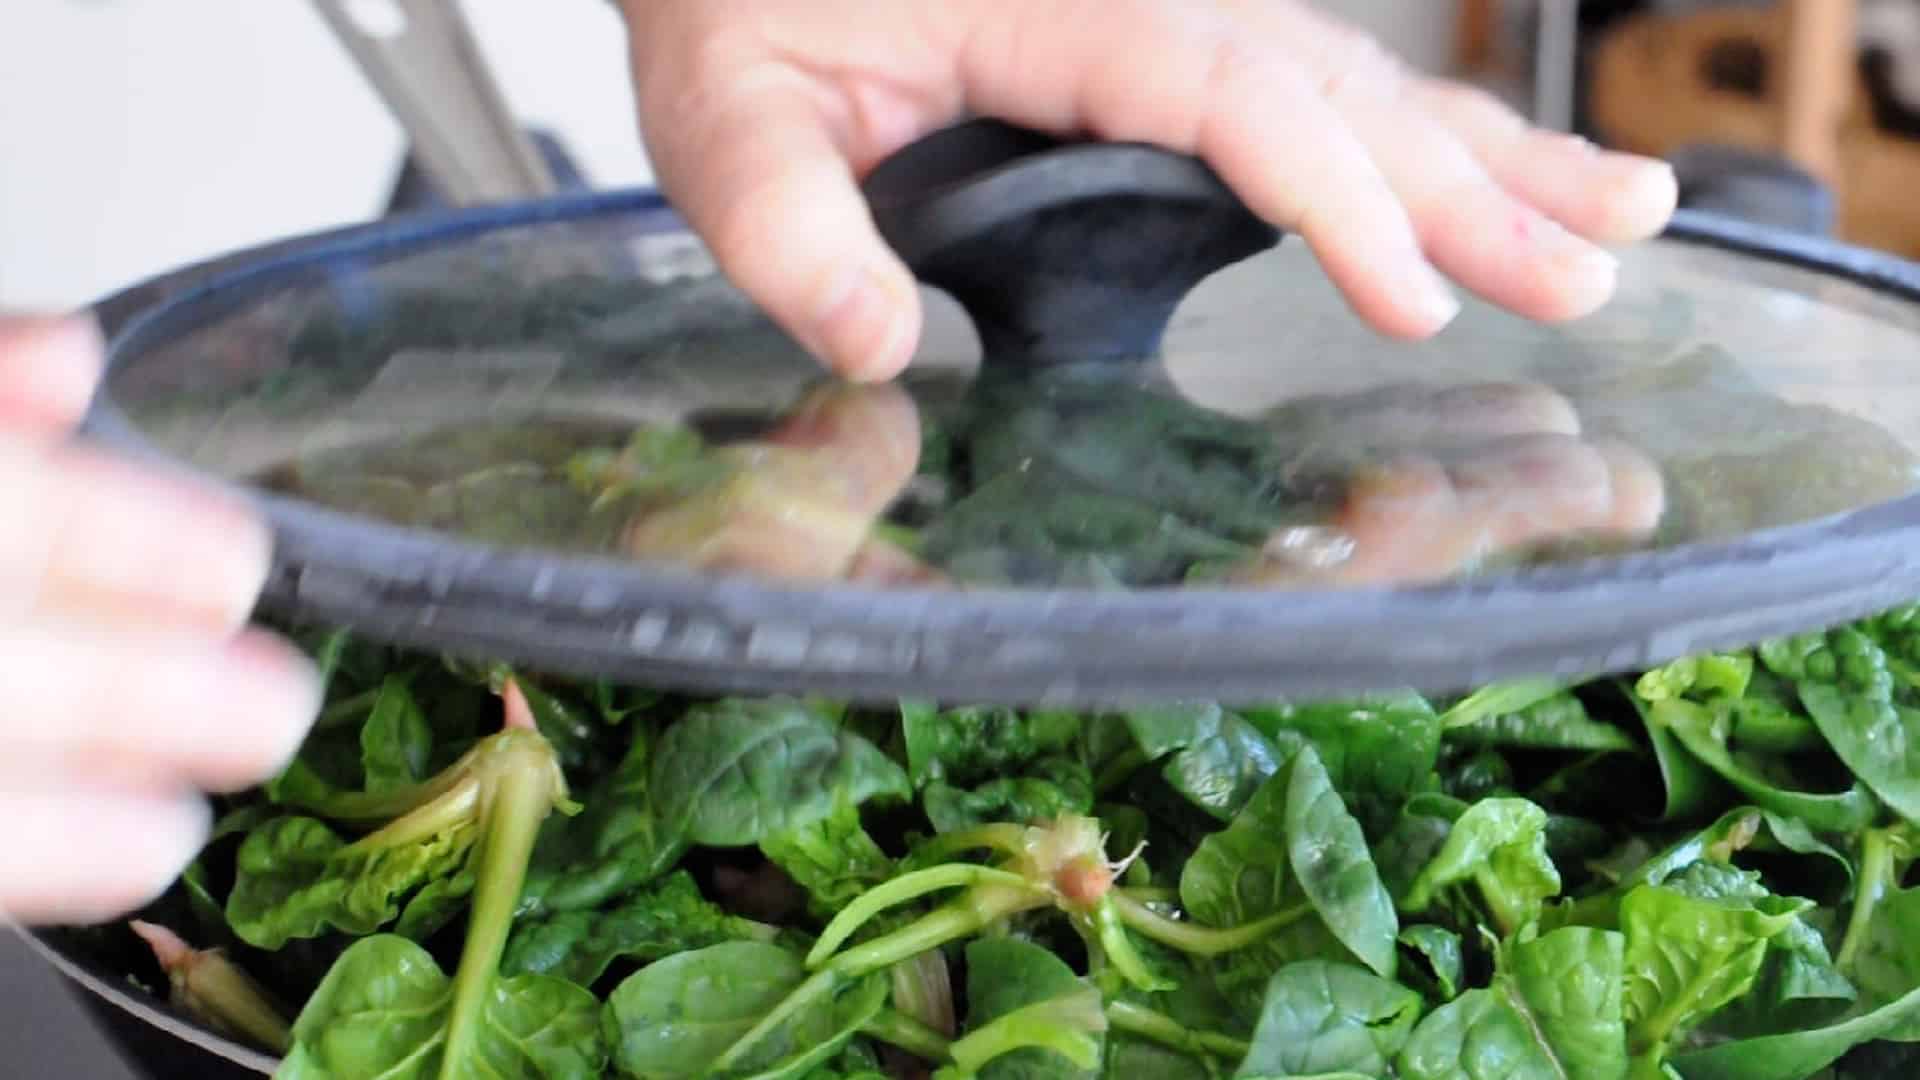 Press the lid over the spinach